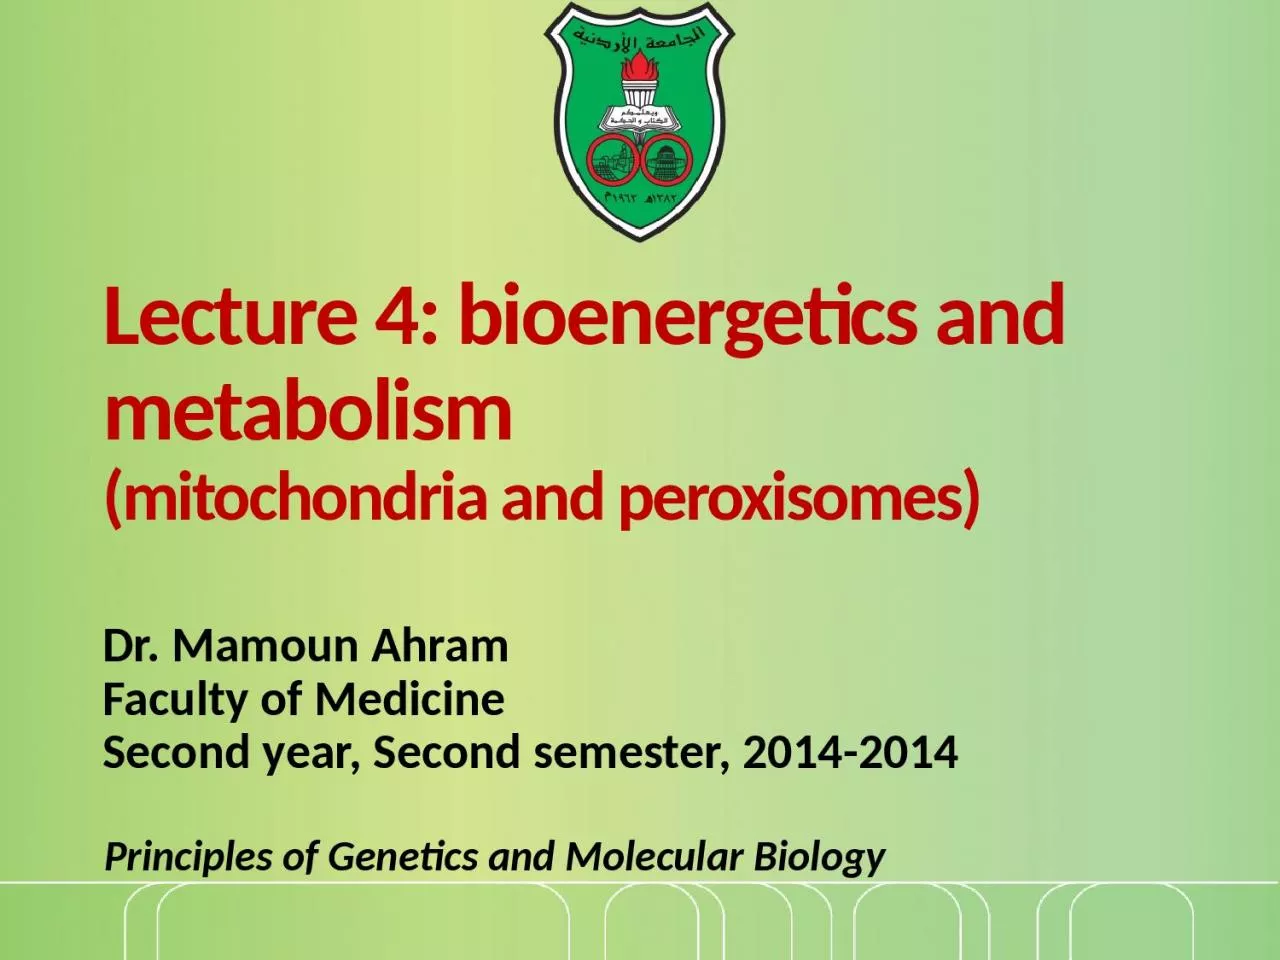 Lecture 4: bioenergetics and metabolism